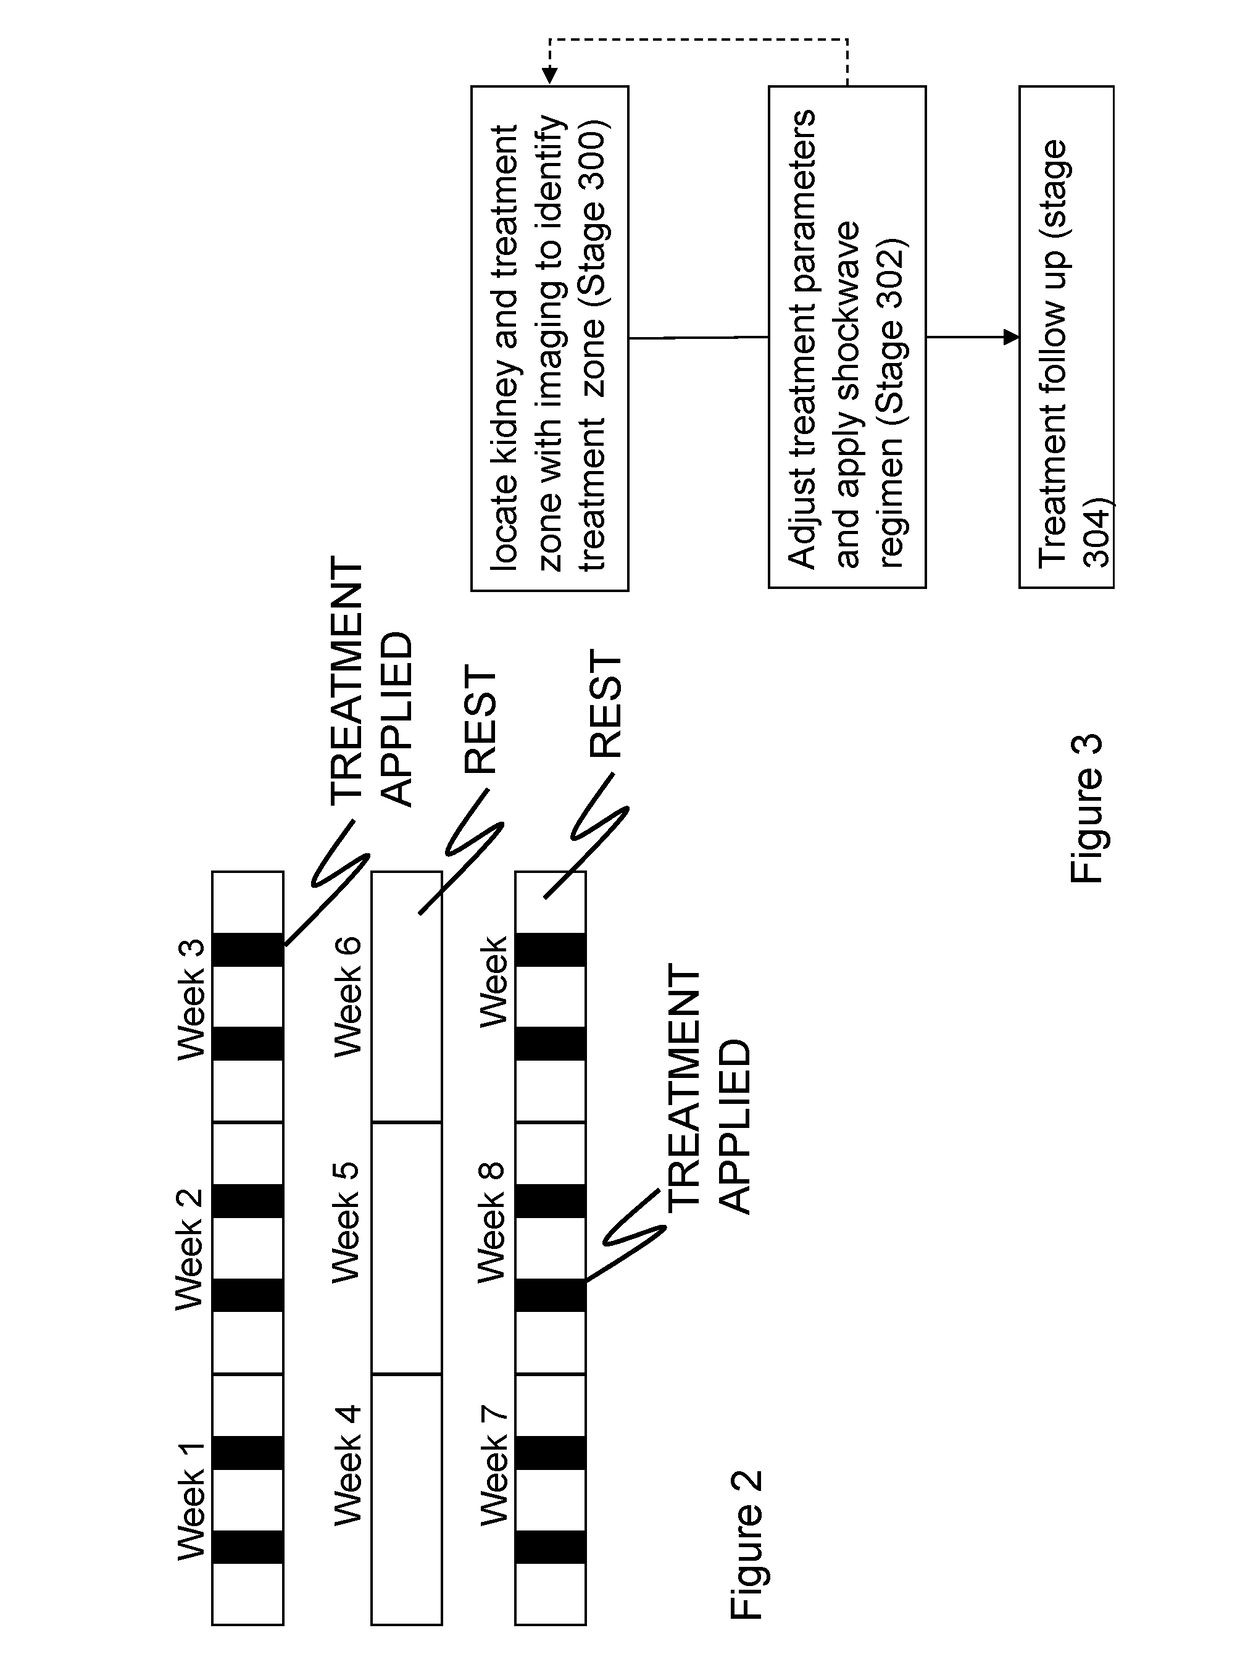 Method for imporoving kidney function with extracorporeal shockwaves